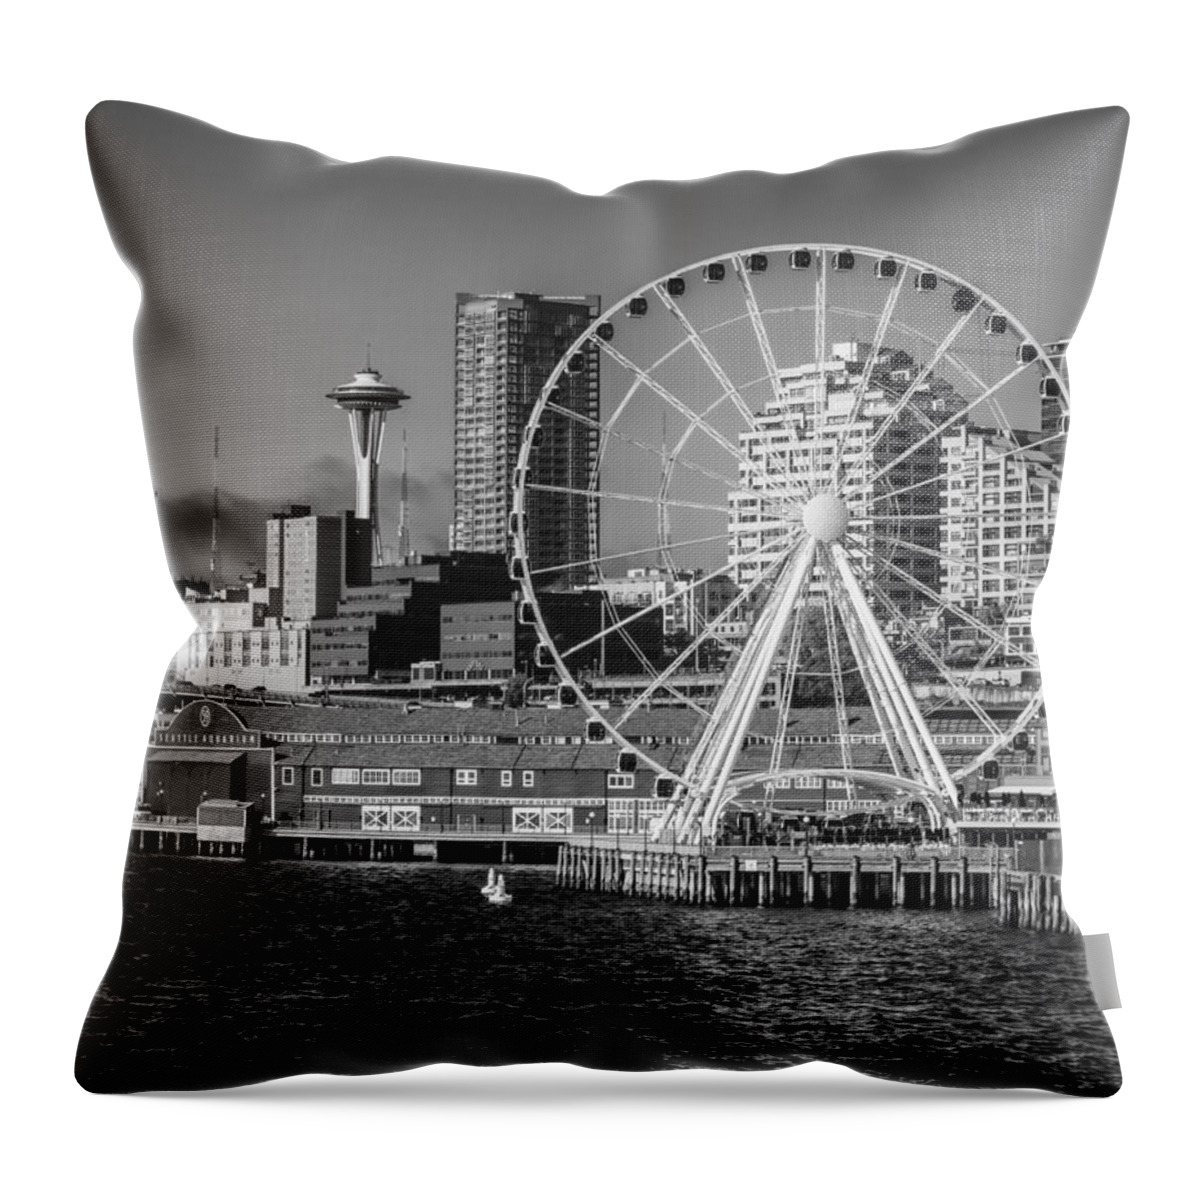 Great Throw Pillow featuring the photograph Seattle's Great Wheel by Kyle Wasielewski